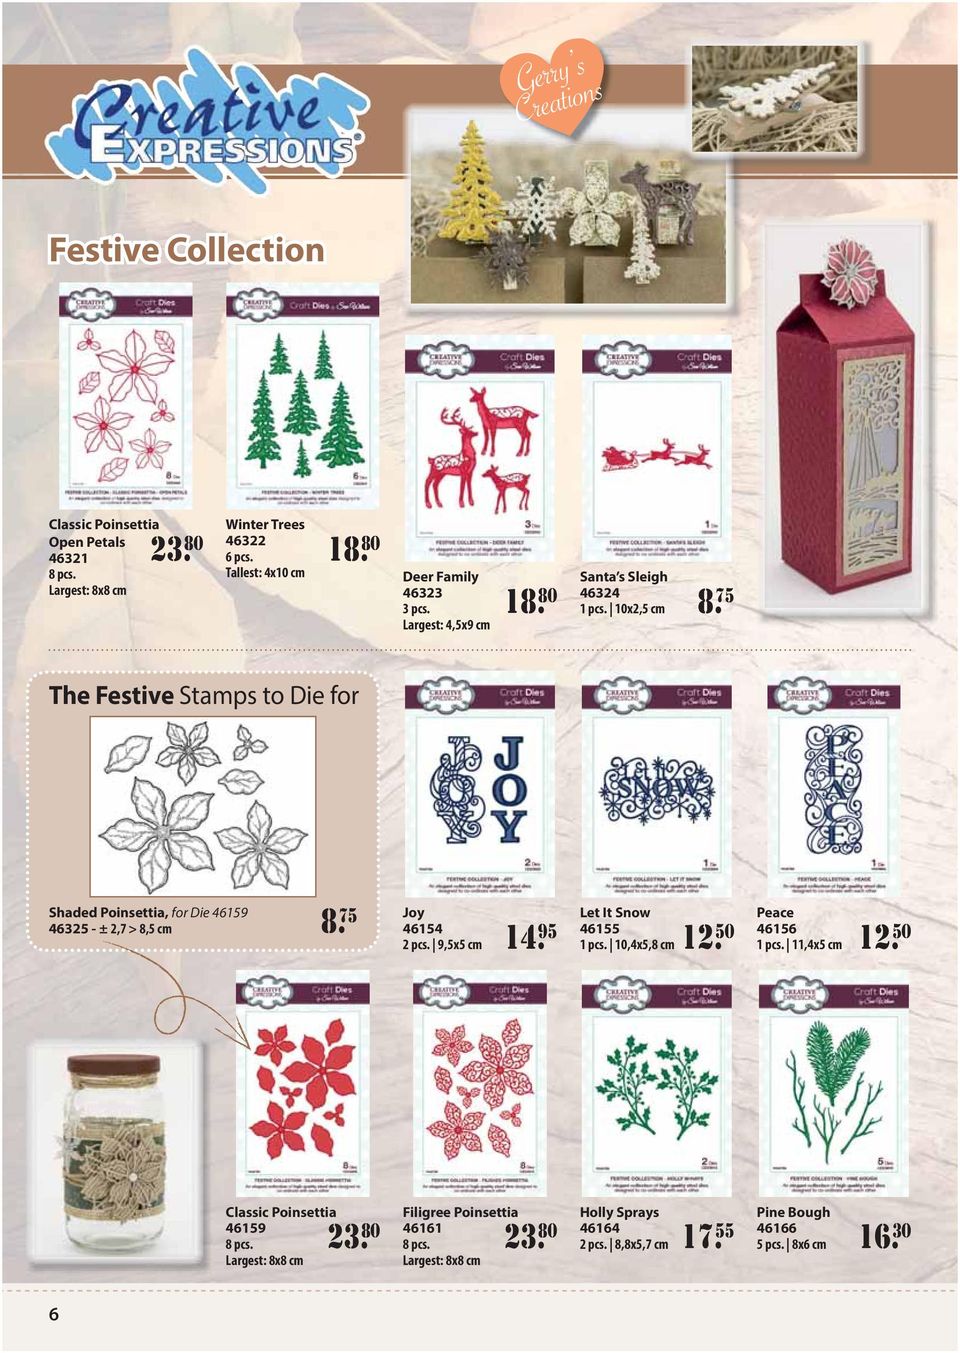 75 The Festive Stamps to Die for Shaded Poinsettia, for Die 46159 46325 - ± 2,7 > 8,5 cm 8. 75 Joy 46154 2 pcs. 9,5x5 cm 14. 95 Let It Snow 46155 1 pcs.